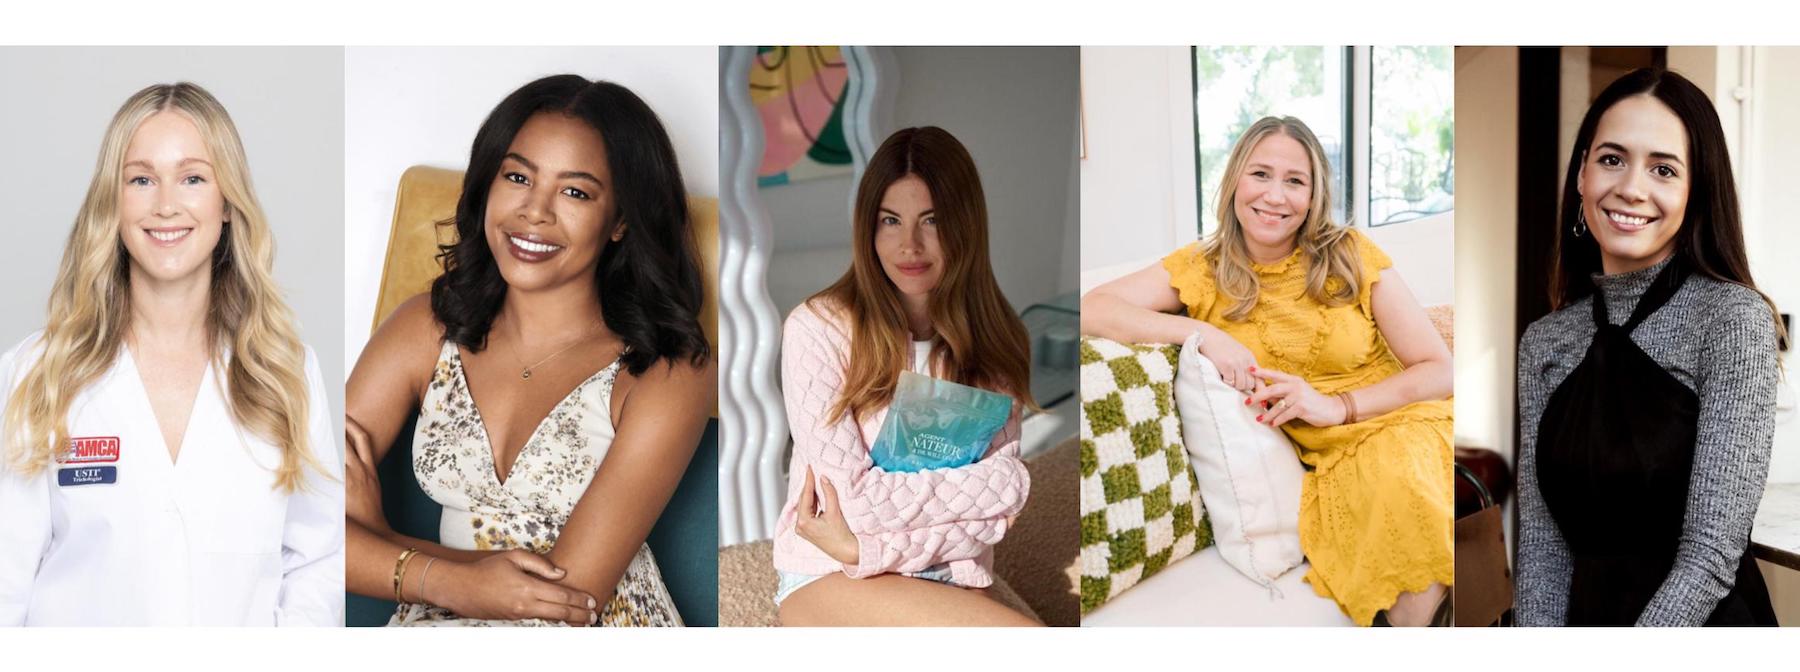 Beauty Made Mindful: What Inspires These Five Conscious Beauty Brand Founders